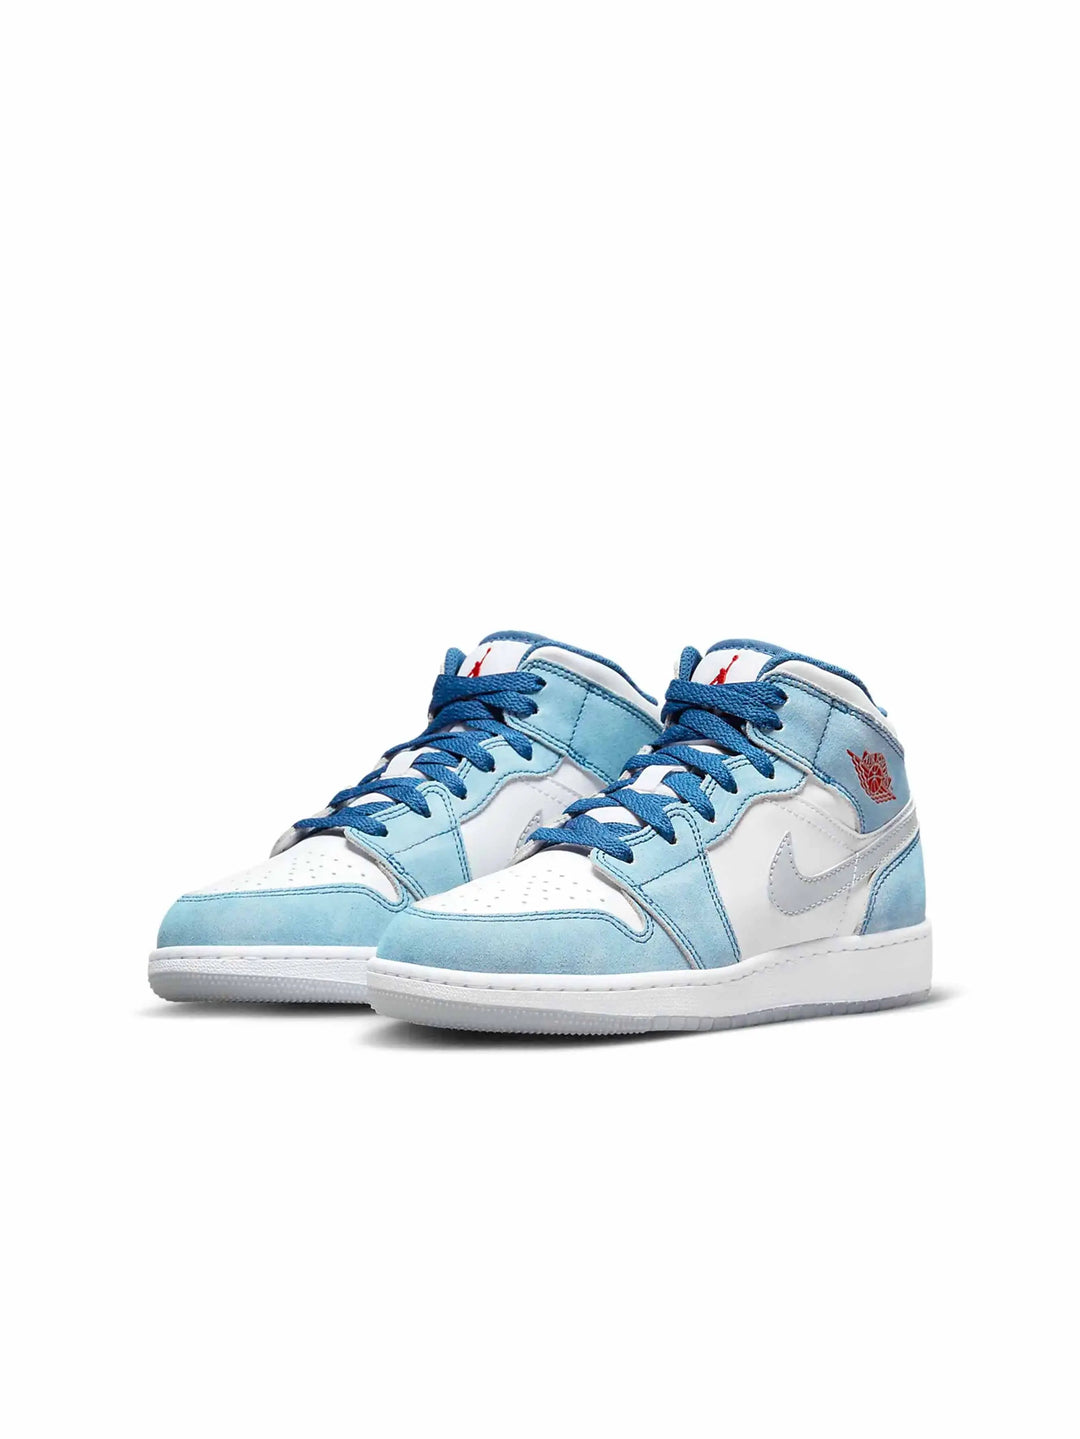 Nike Air Jordan 1 Mid French Blue Fire Red (GS) Prior